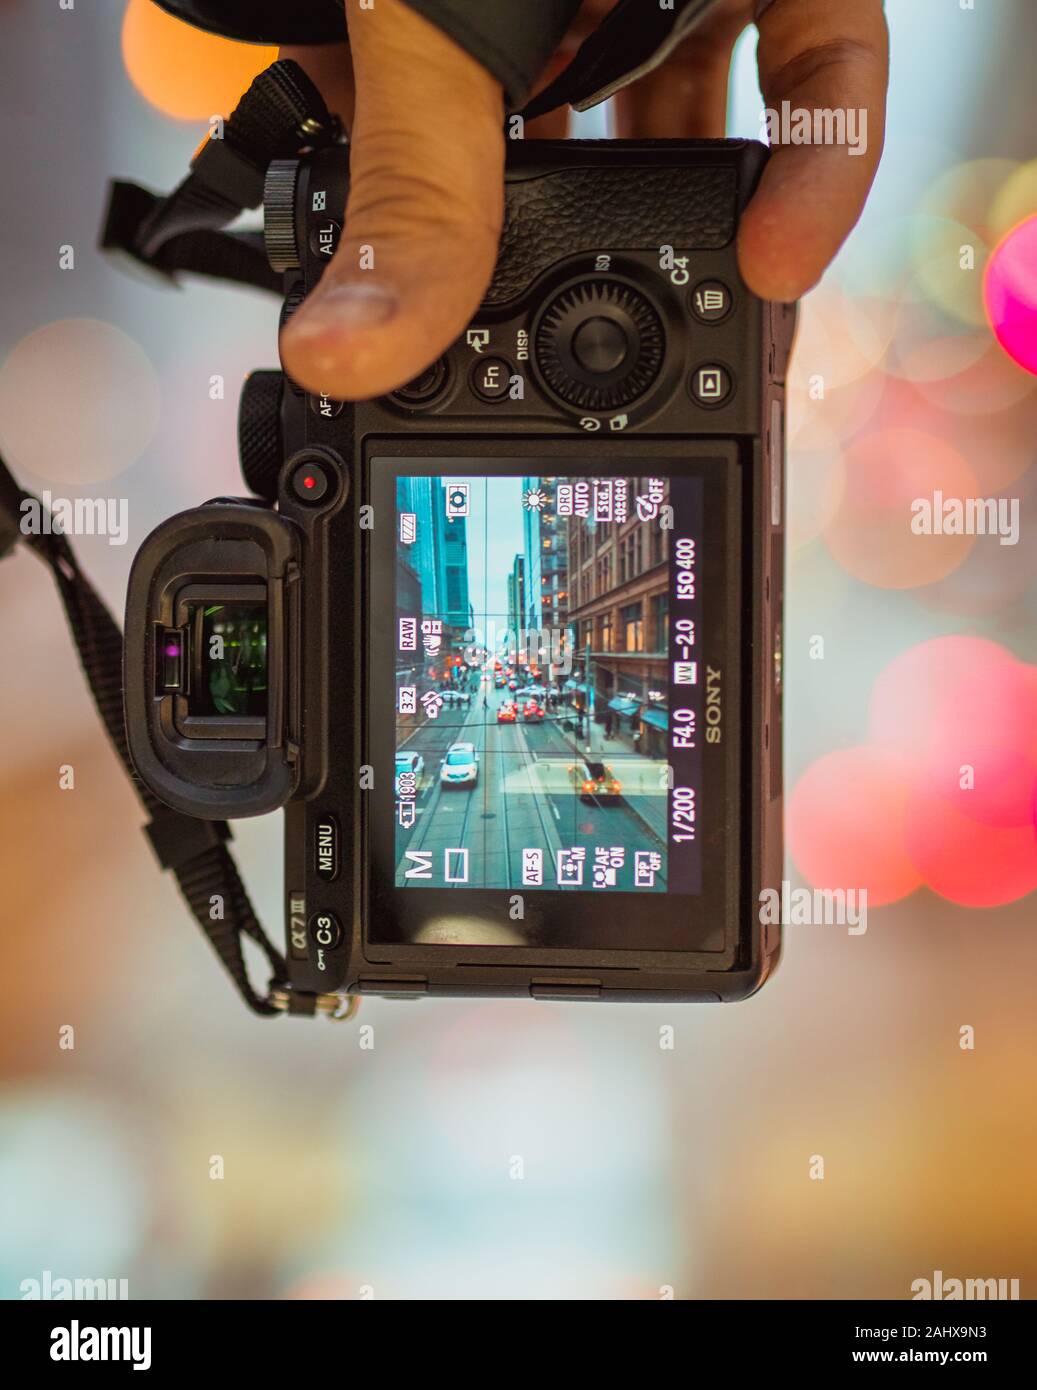 Holding Sony Alpha 7 III showing streets of Toronto, Ontario, Canada with traffic flowing in both directions Stock Photo